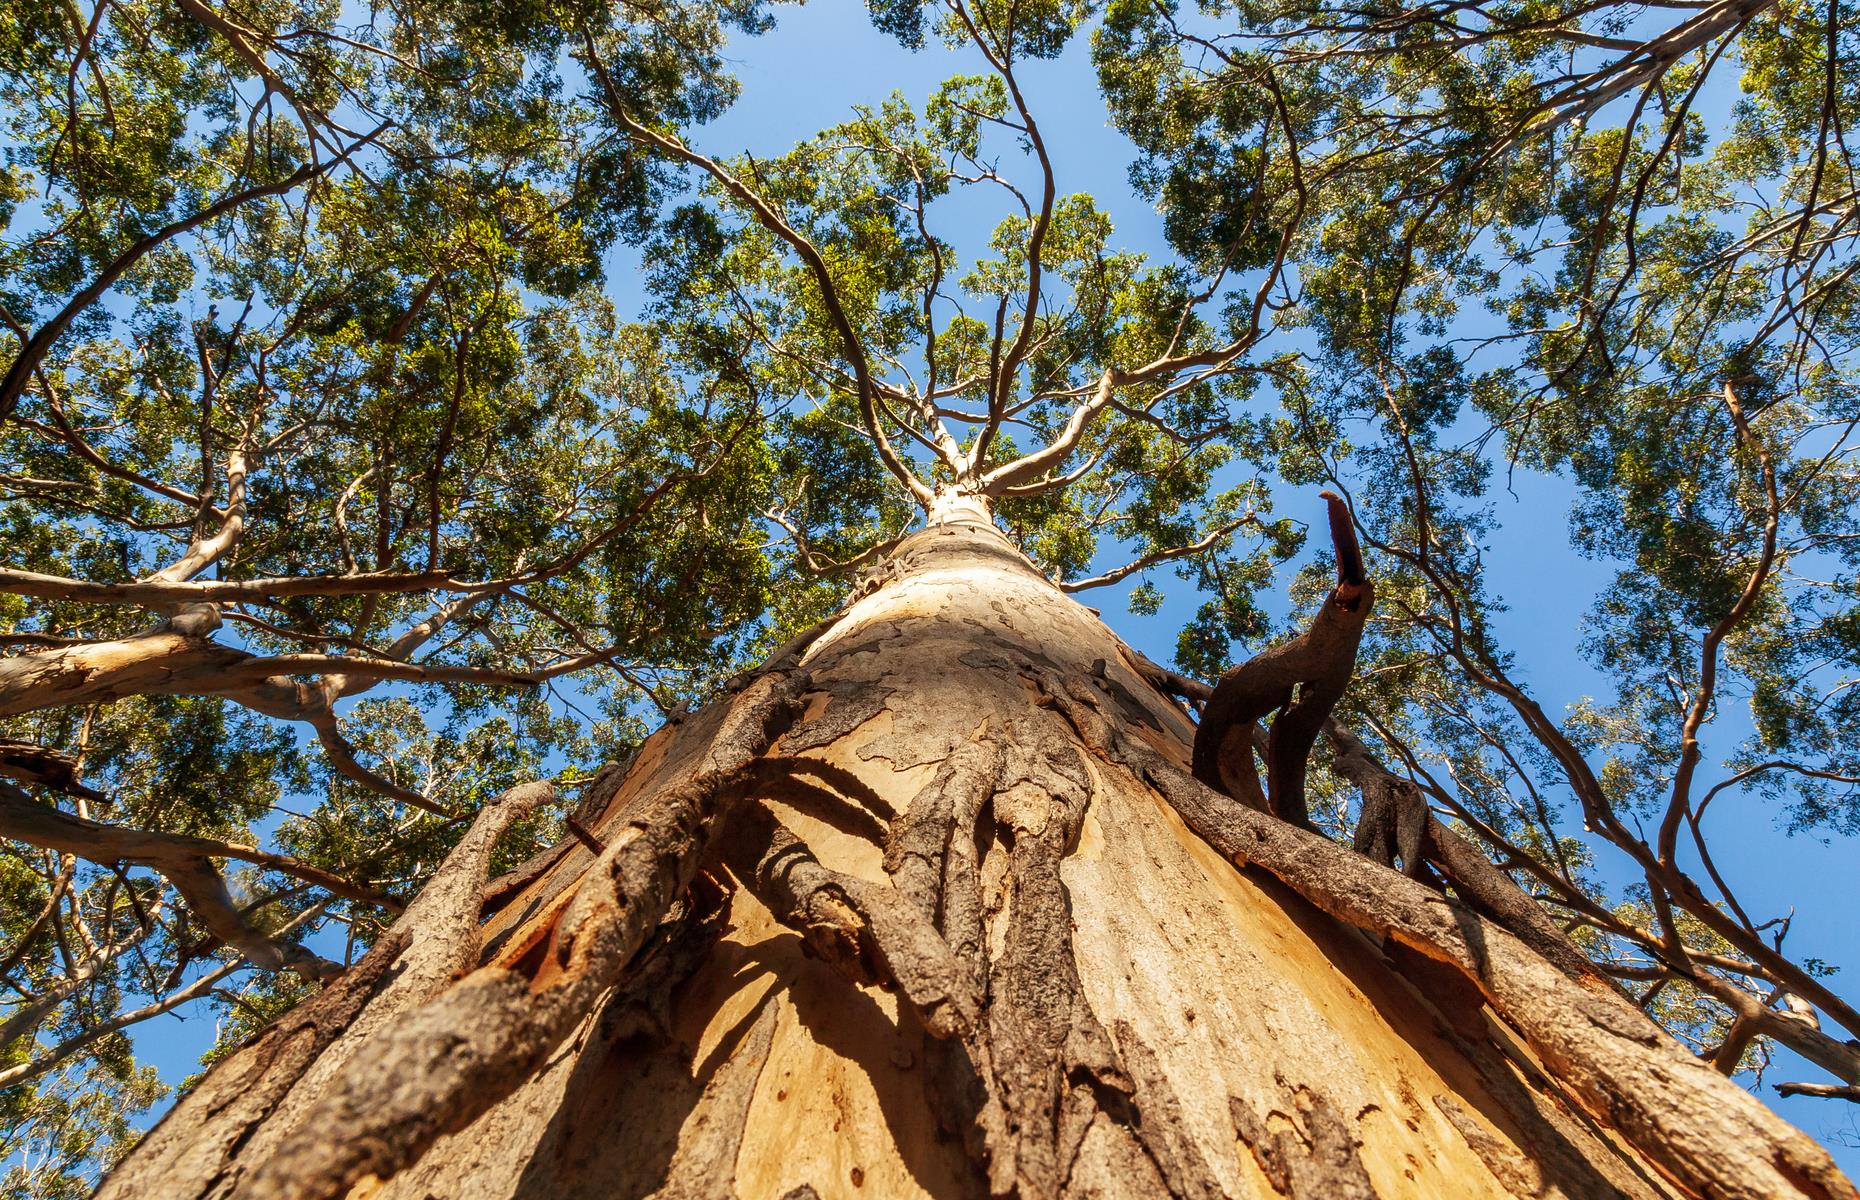 As well as magnificent surf beaches, the southern part of Western Australia is home to unique forest habitats where some of the world’s tallest tree species flourish. Feel dwarfed by the imposing karri trees in the Boranup Karri Forest or walk high in the canopy of an ancient tingle forest. You can see the giant eucalyptus, which are found nowhere else in the world, at the Tree Top Walk within the Walpole-Nornalup National Park and Walpole Wilderness Area.